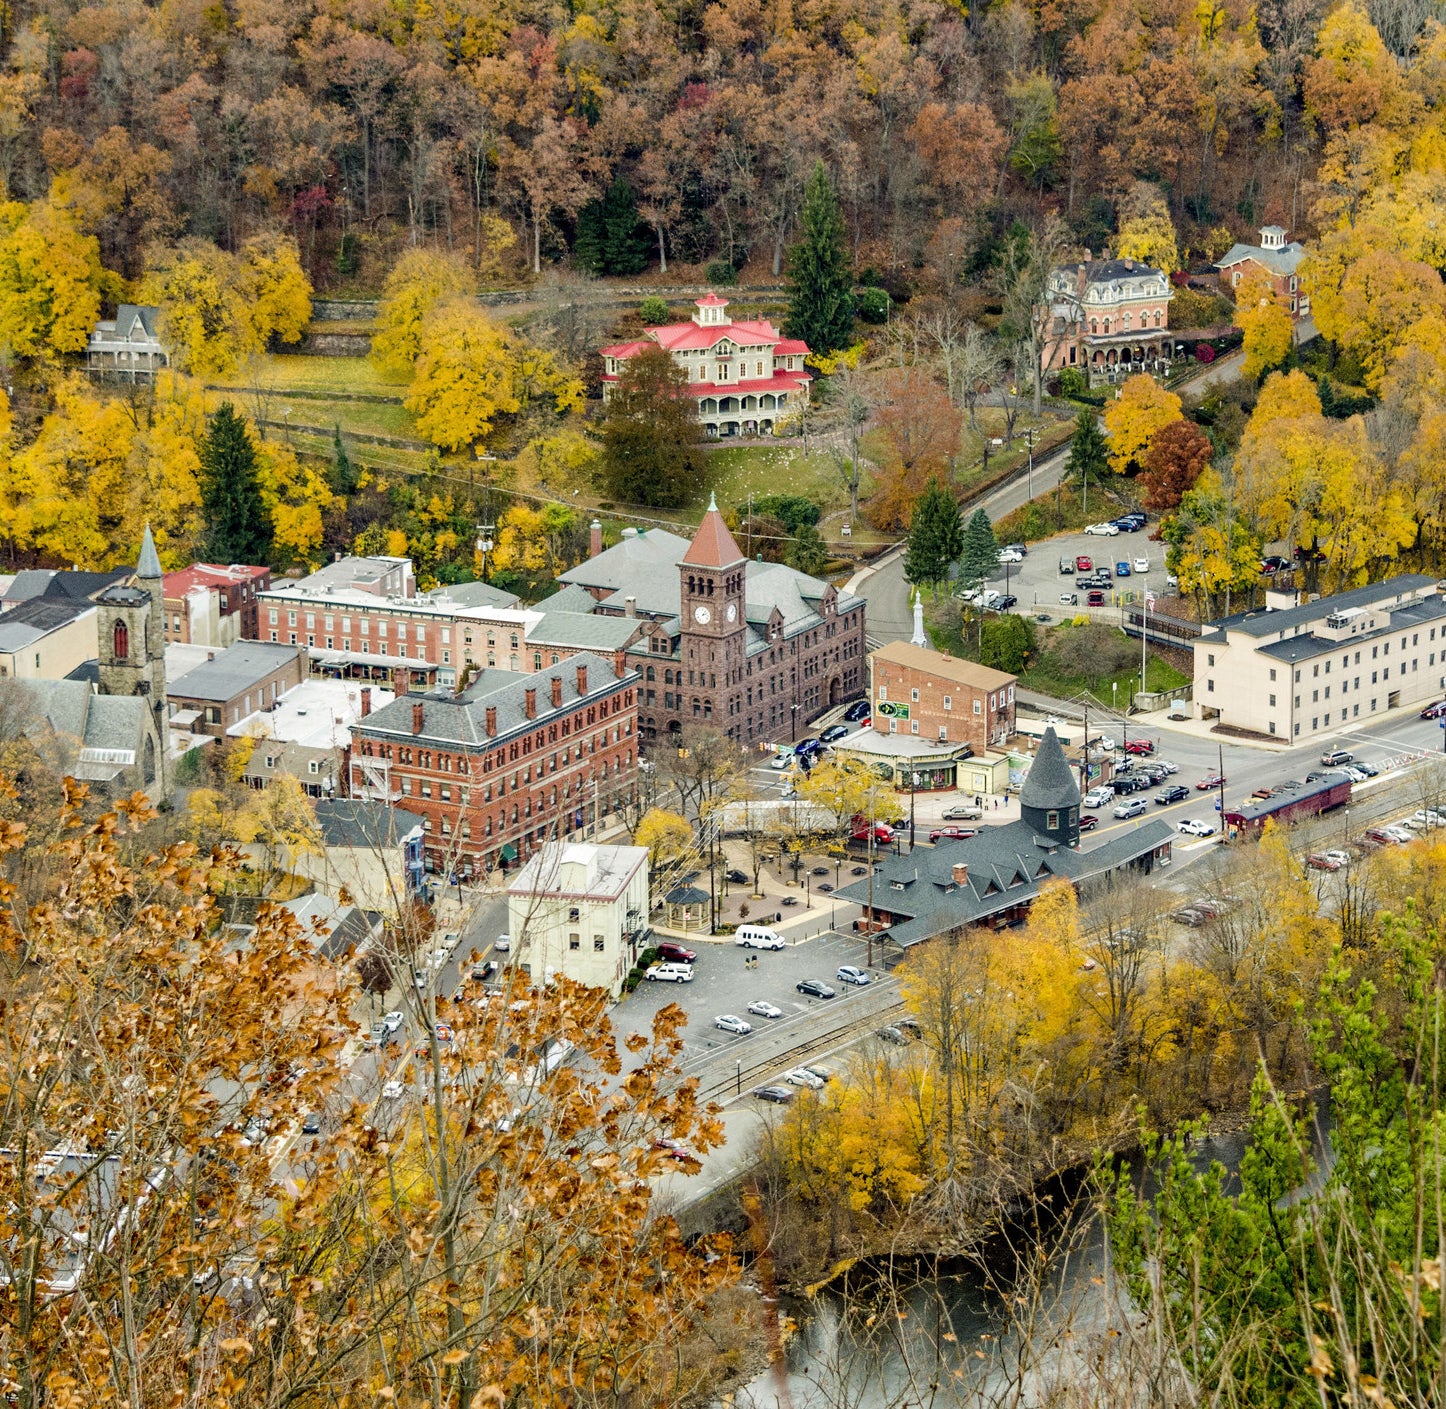 historic buildings and a townhall surrounded by fall foliage 